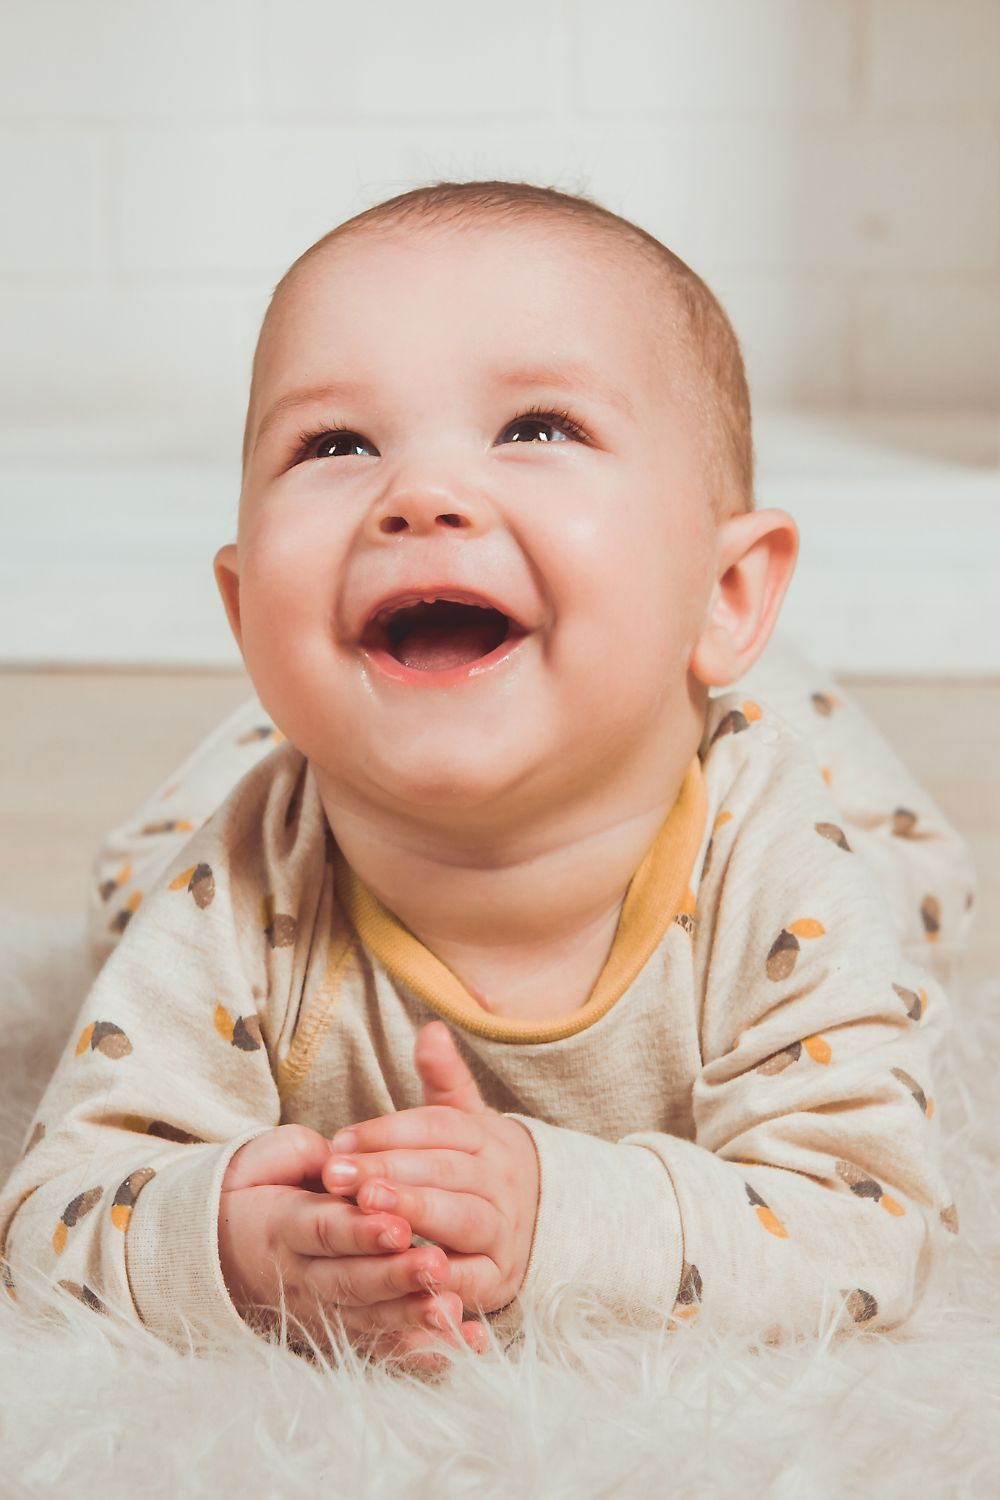 Baby laughing and playing on the floor